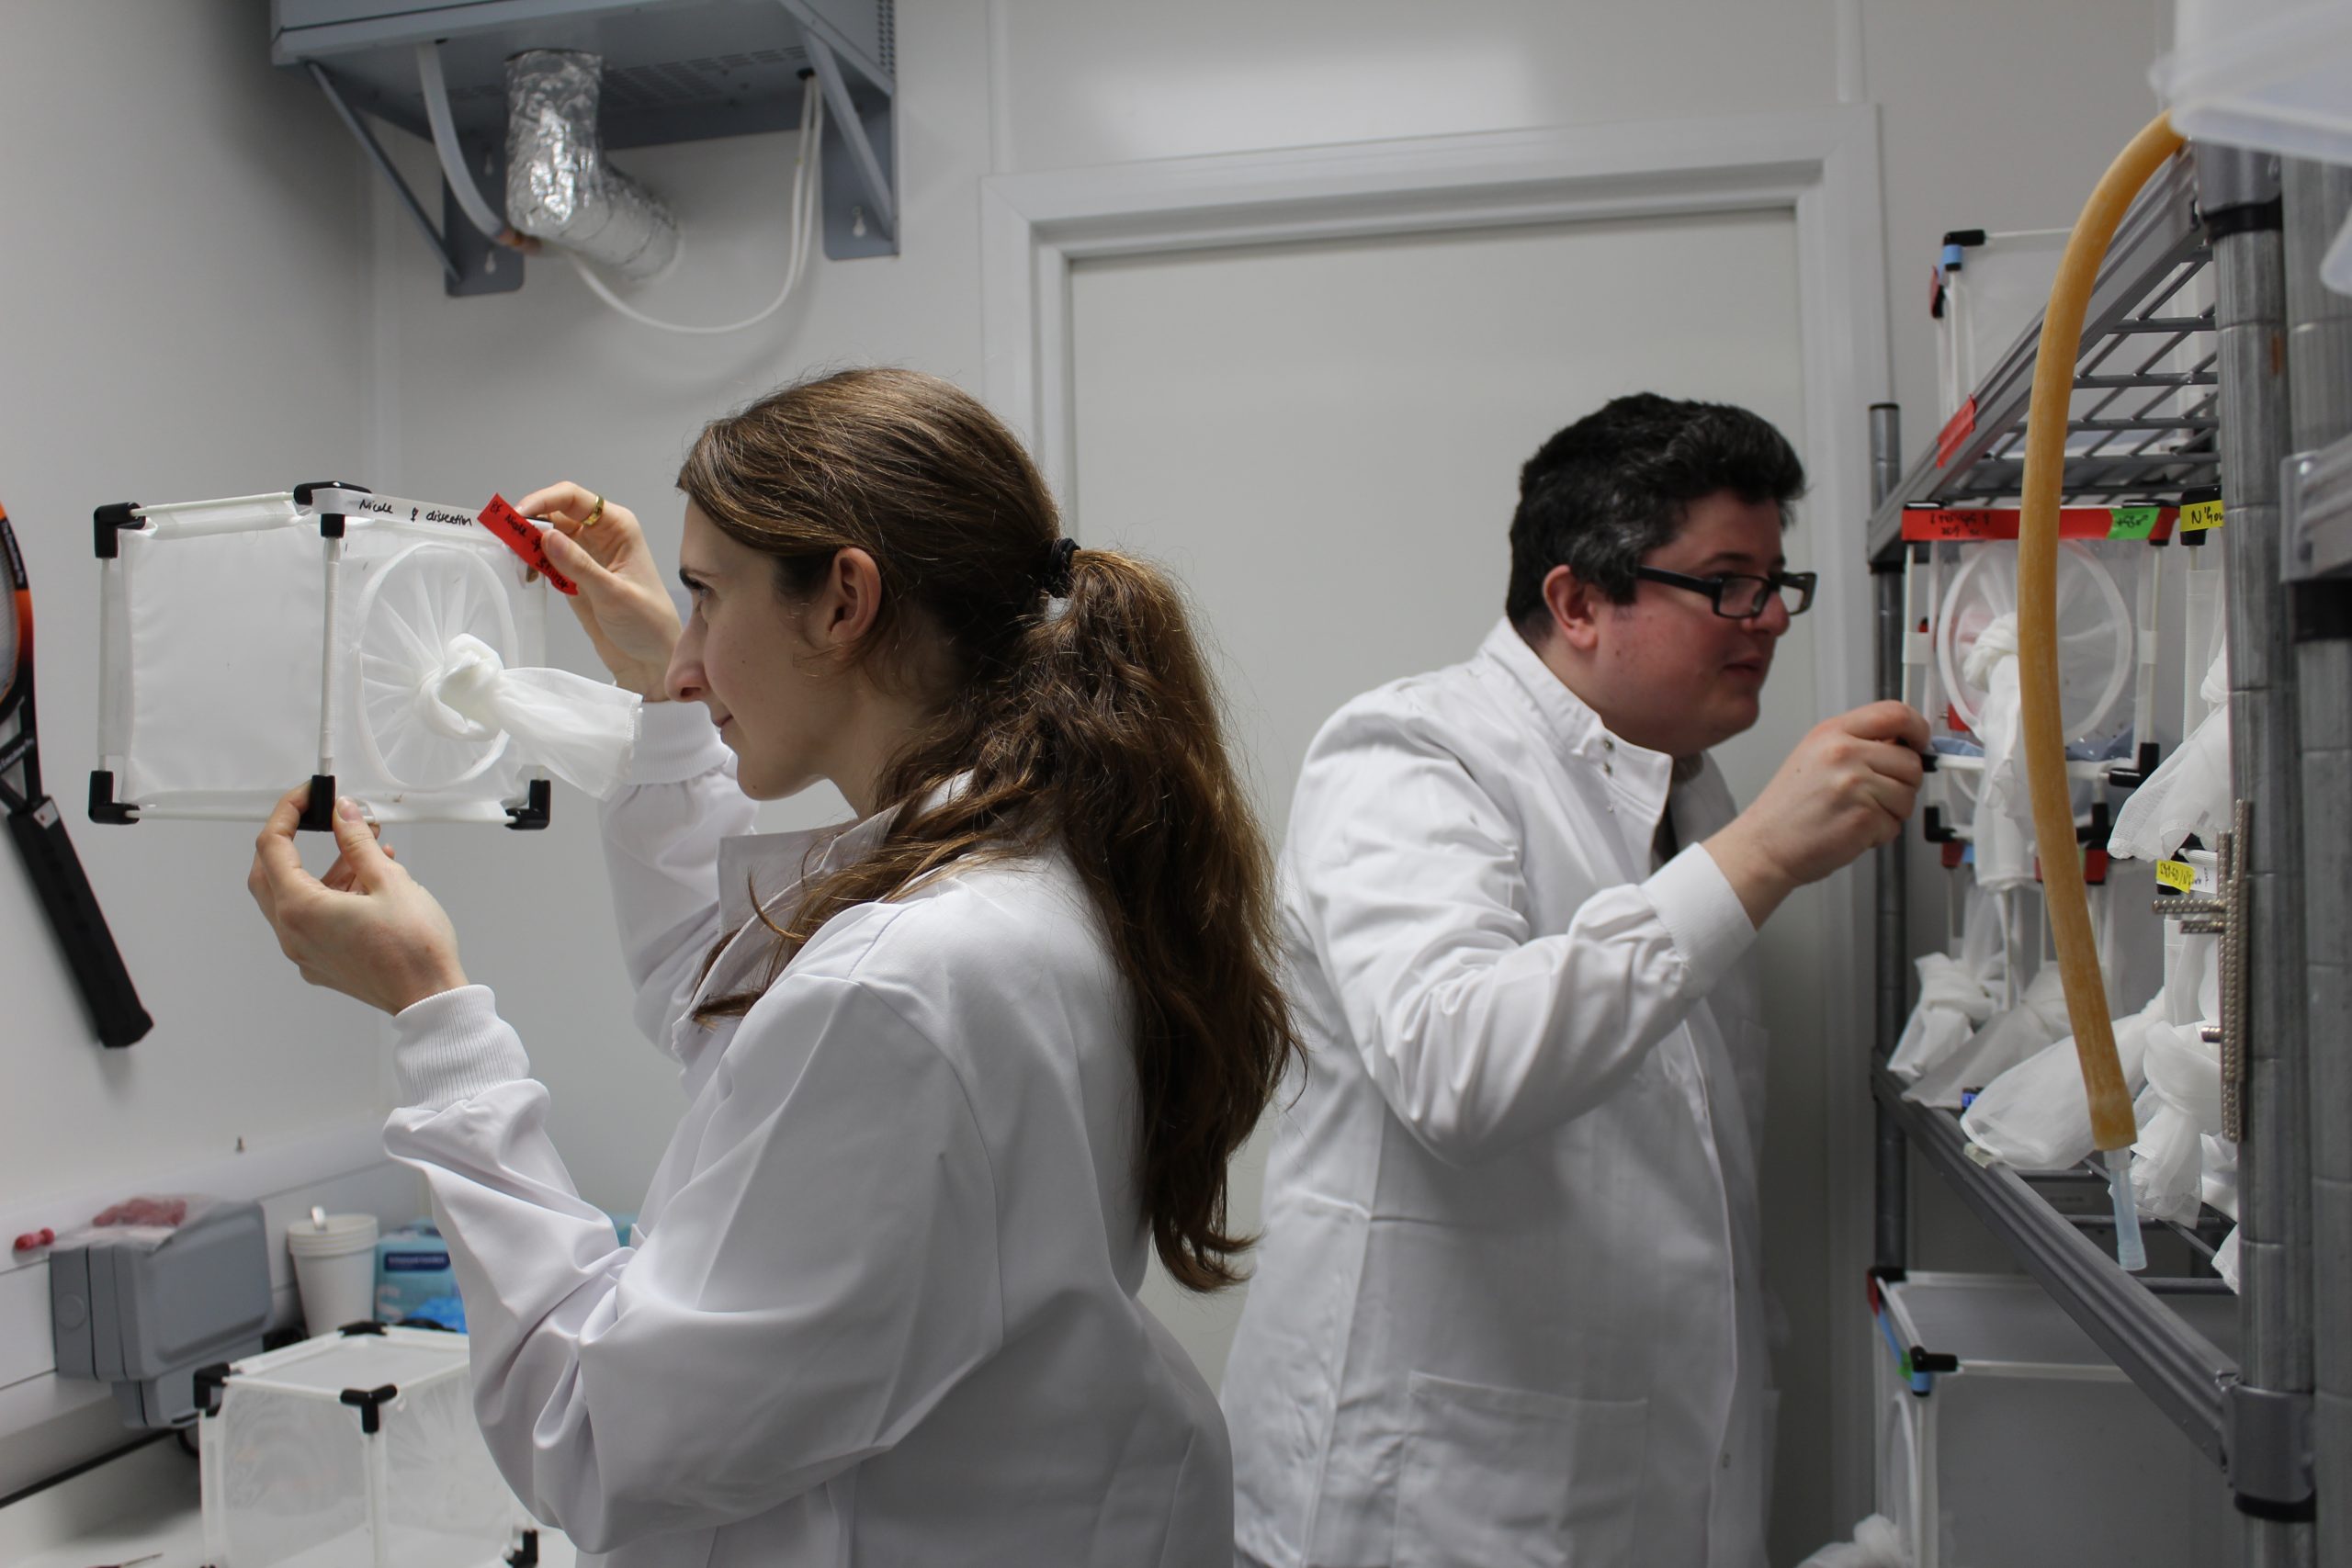 Dr. Nicole Page with her colleague Zachary Stavrou – Dowd at the Liverpool School of Tropical Medicine (LSTM). Photograph: LSTM